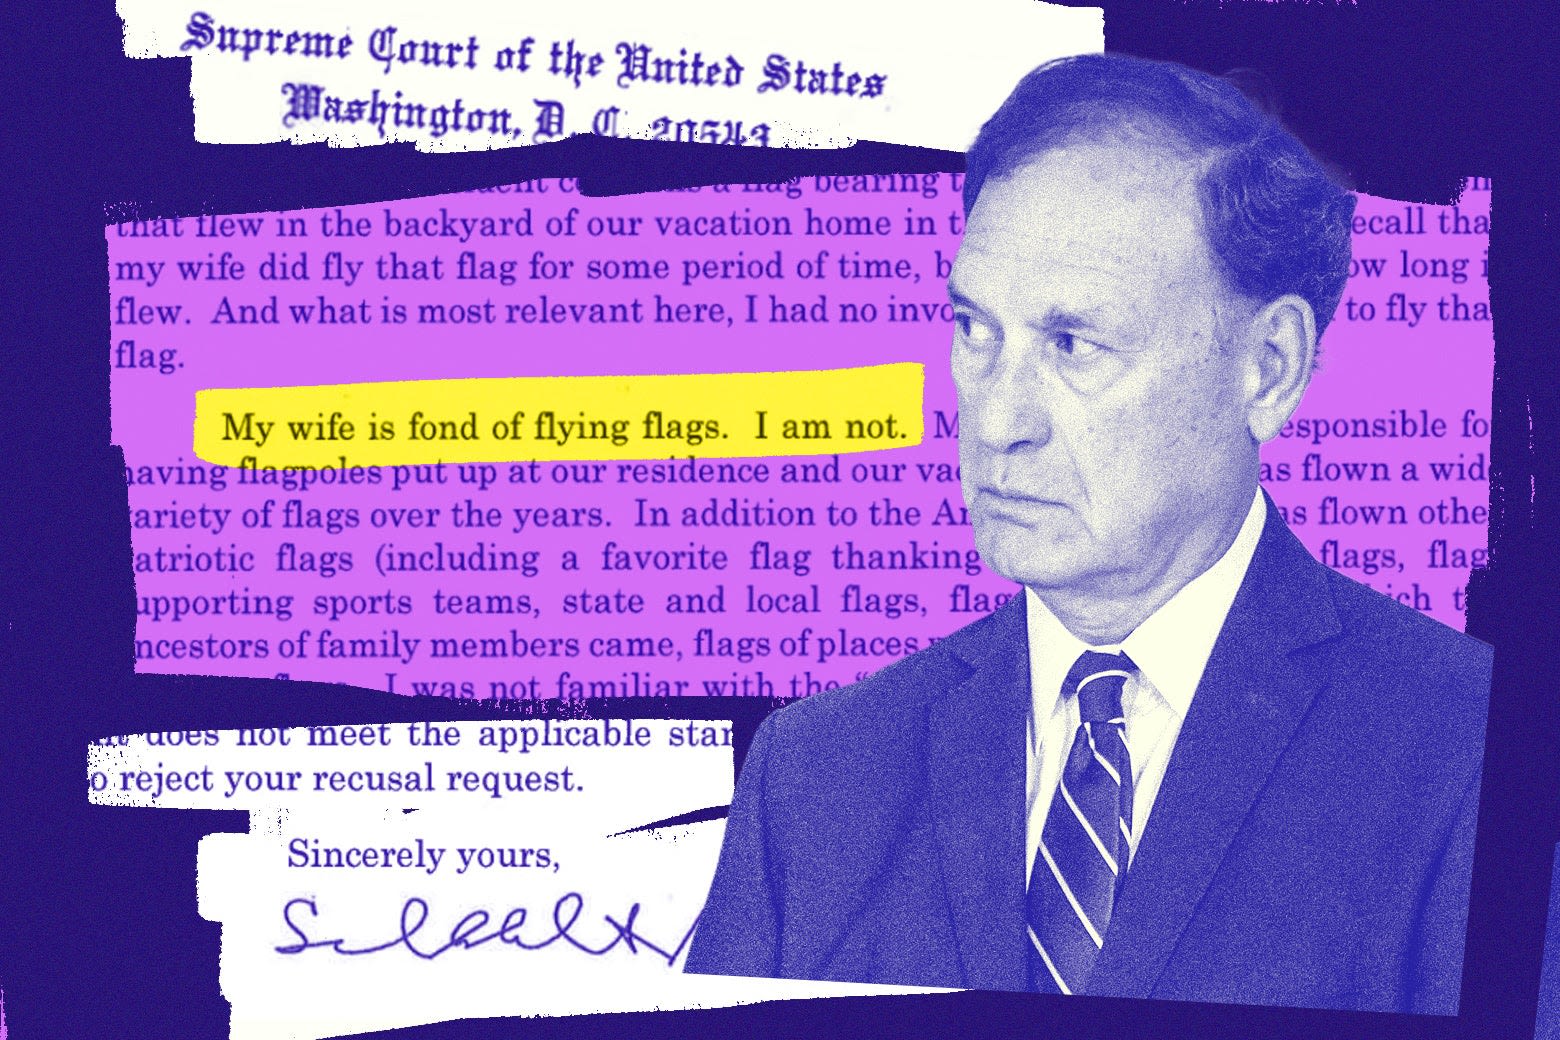 Alito’s Aggrieved Letter to Congress Tips His Hand in the Jan. 6 Cases